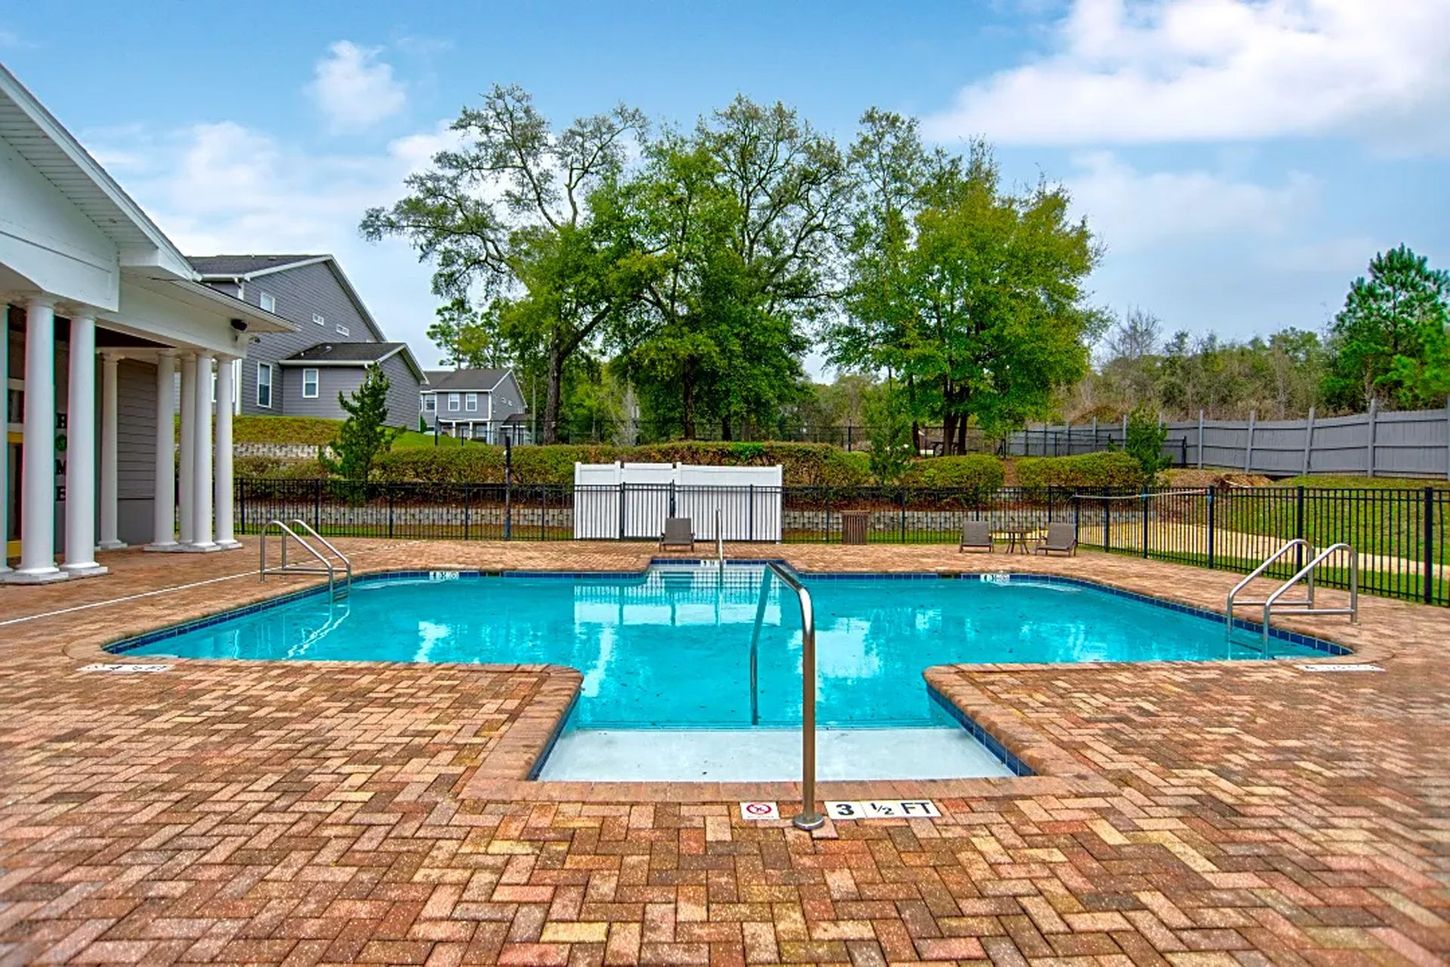 A large swimming pool is surrounded by a brick patio.